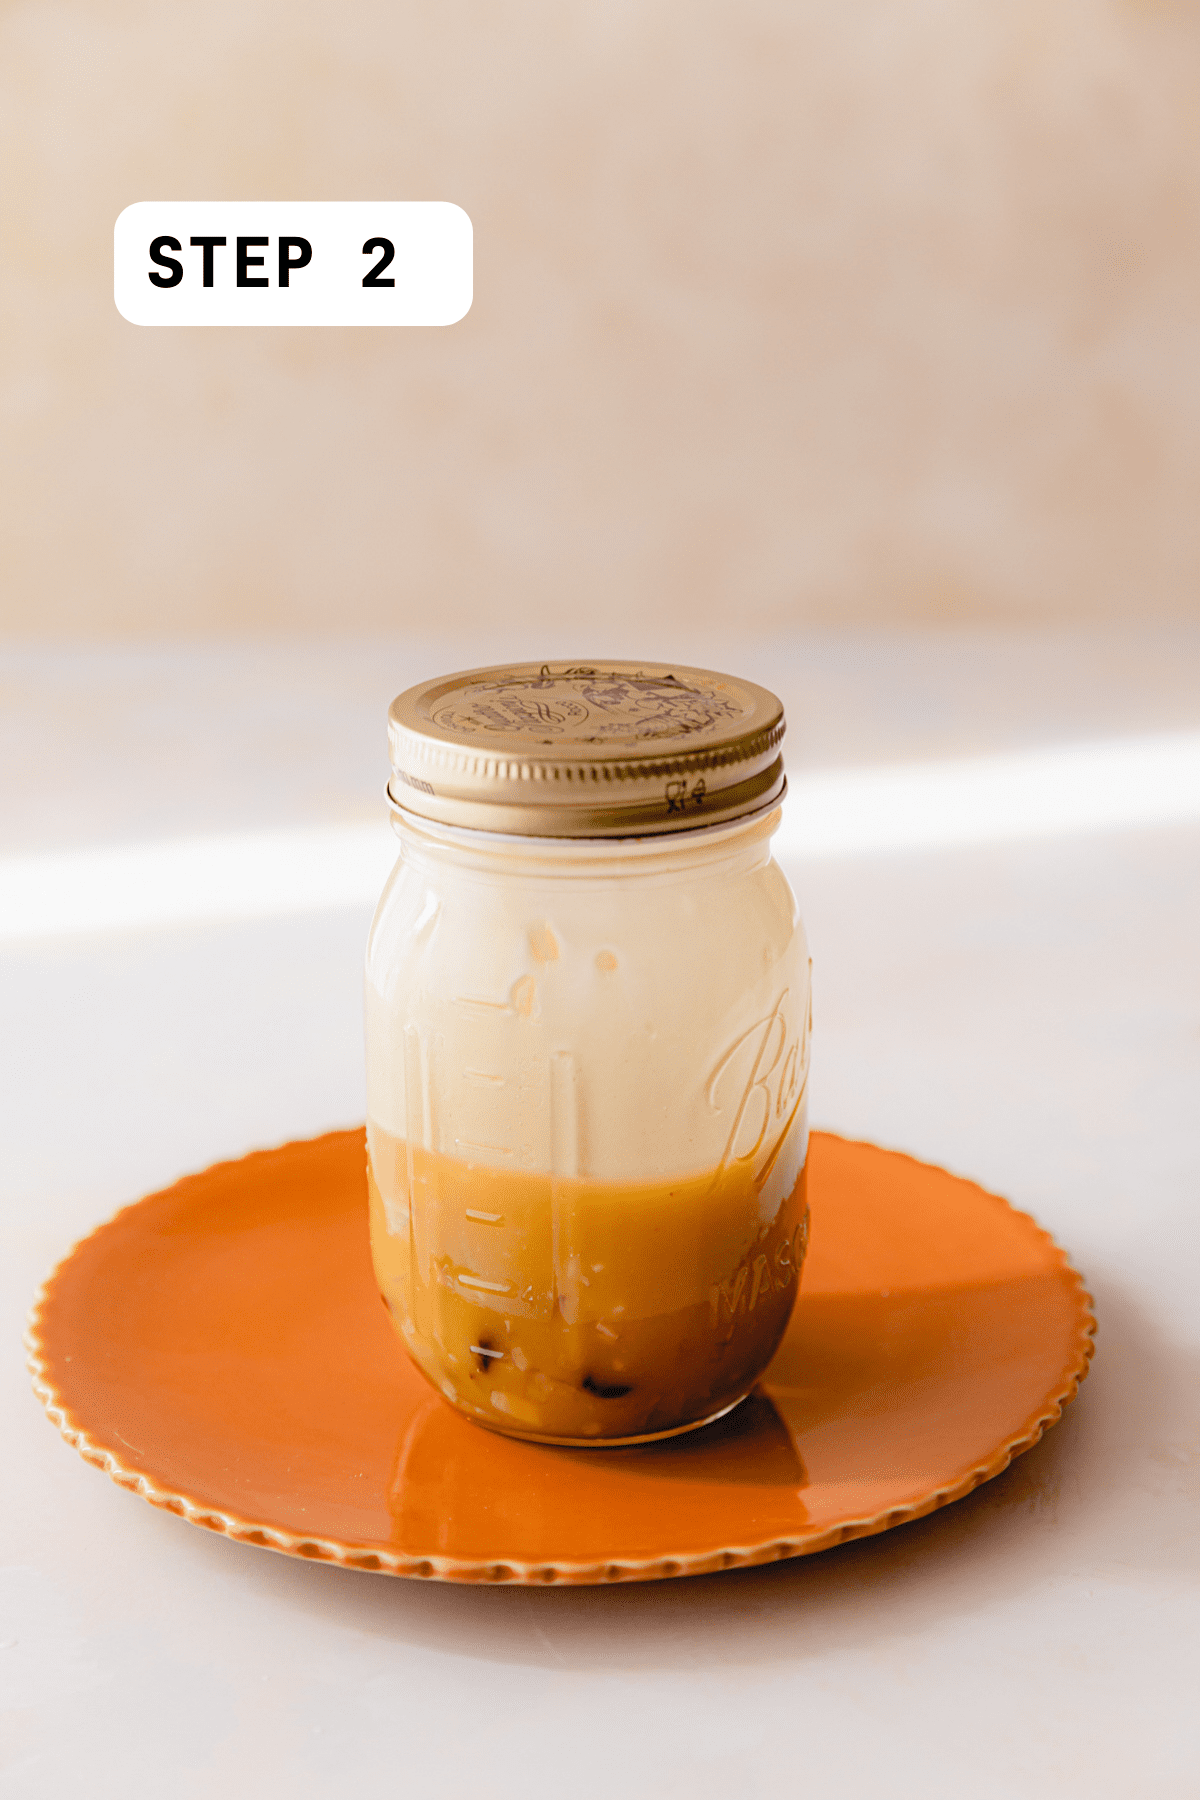 Maple Cranberry Vinaigrette dressing shaken up and combined in a mason jar sitting on an orange plate.